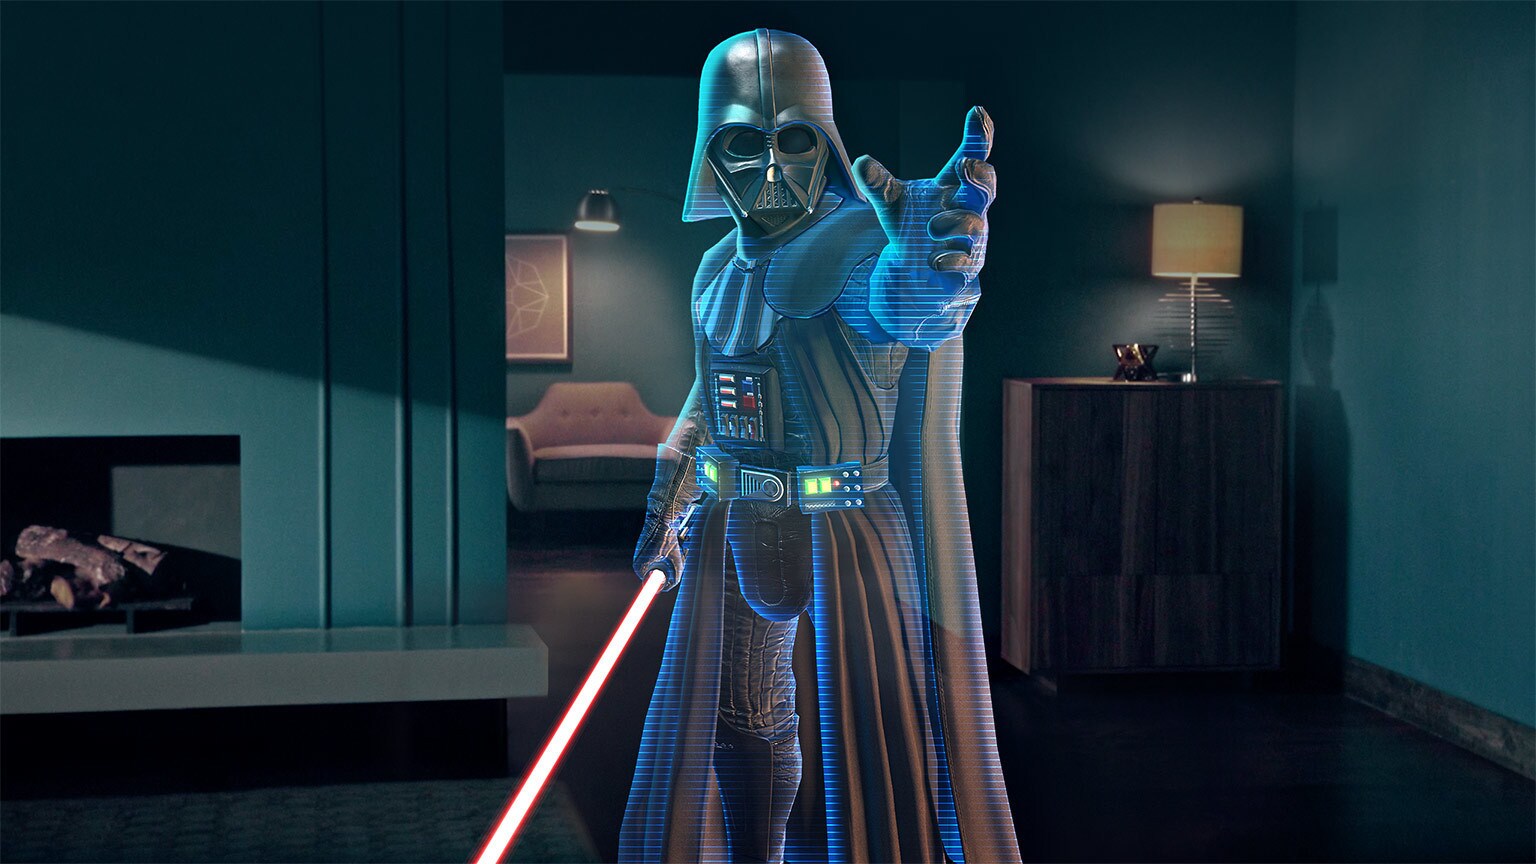 How Jedi Challenges Brings Star Wars to Life at Home